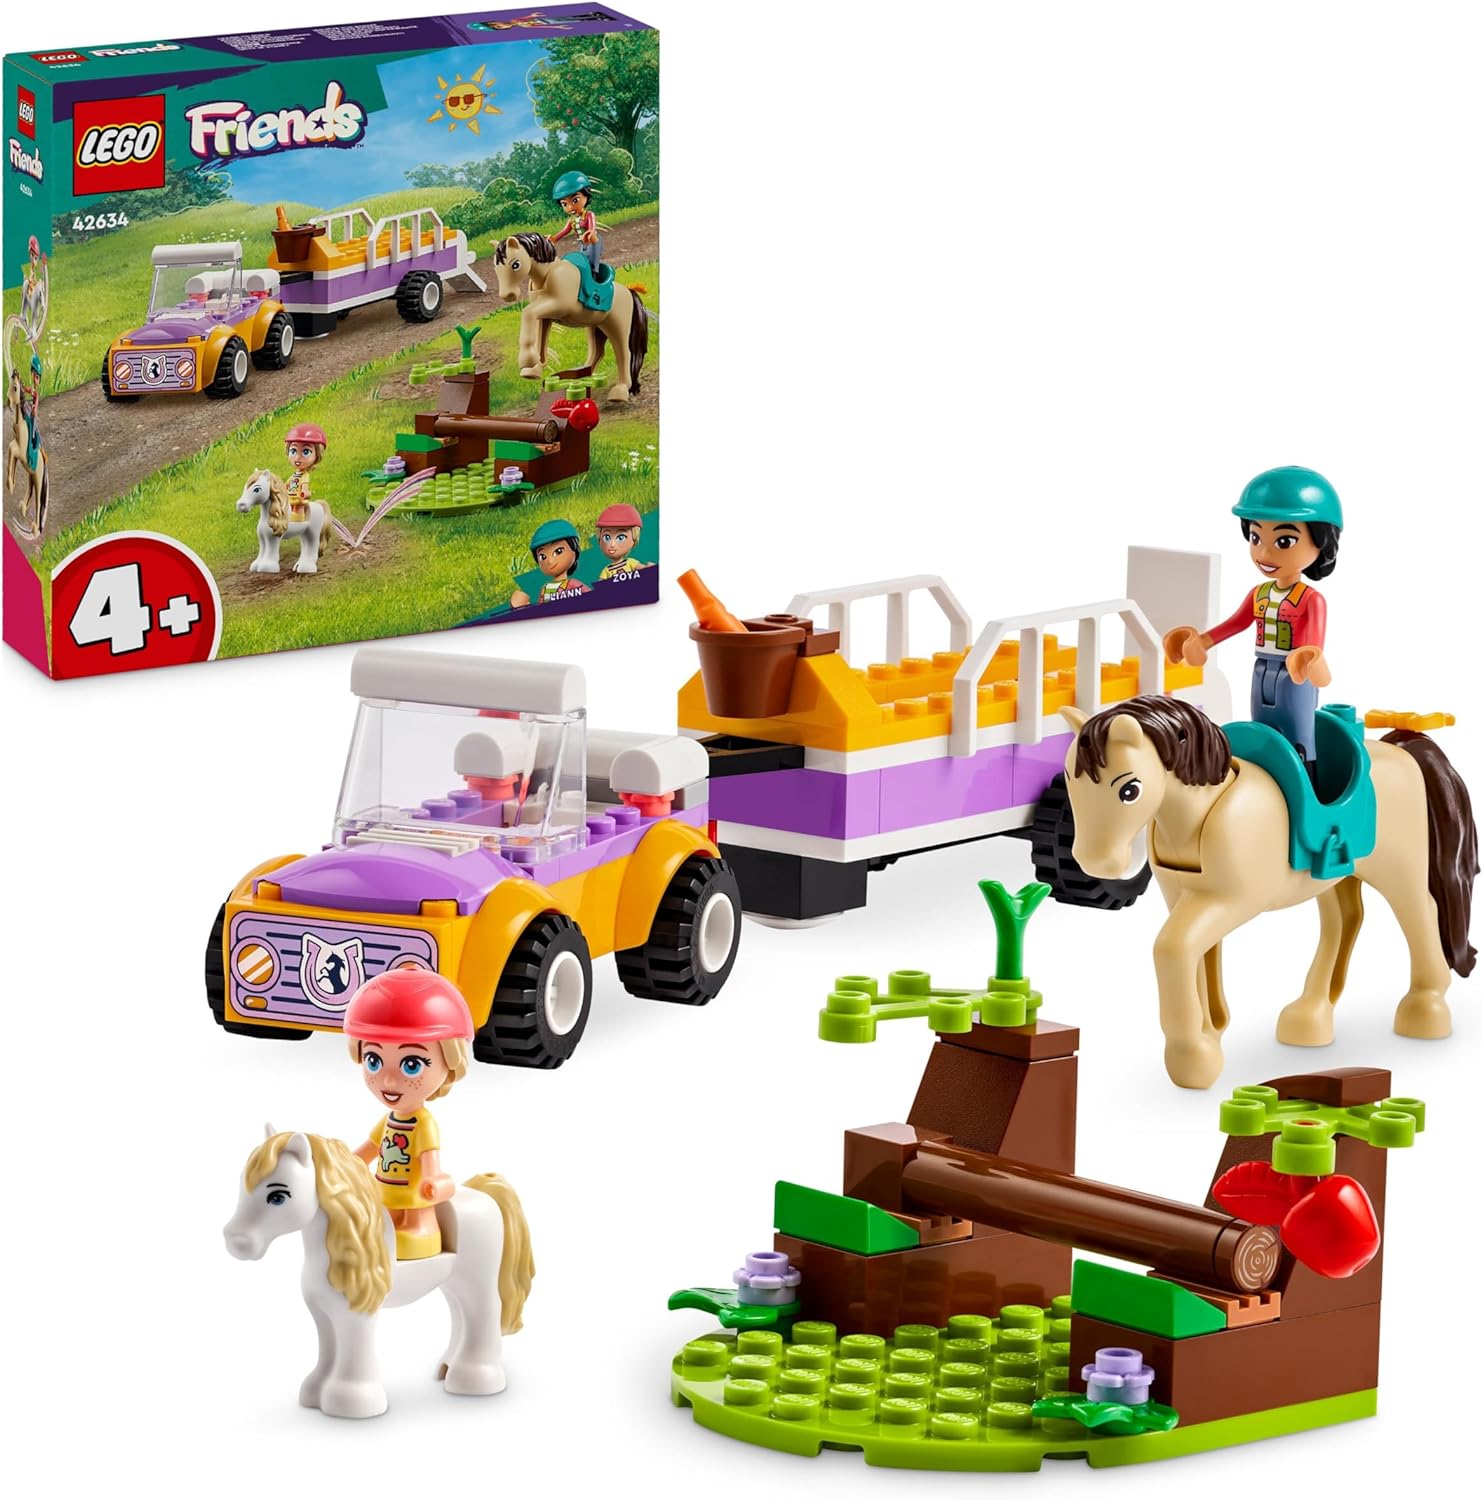 LEGO Friends Horse and Pony Pendant, Horse Toy for Girls and Boys with Car and Figures, Mini Doll Set with Liann, Zoya and 2 Animal Figures, Gift for Children 4 Years 42634